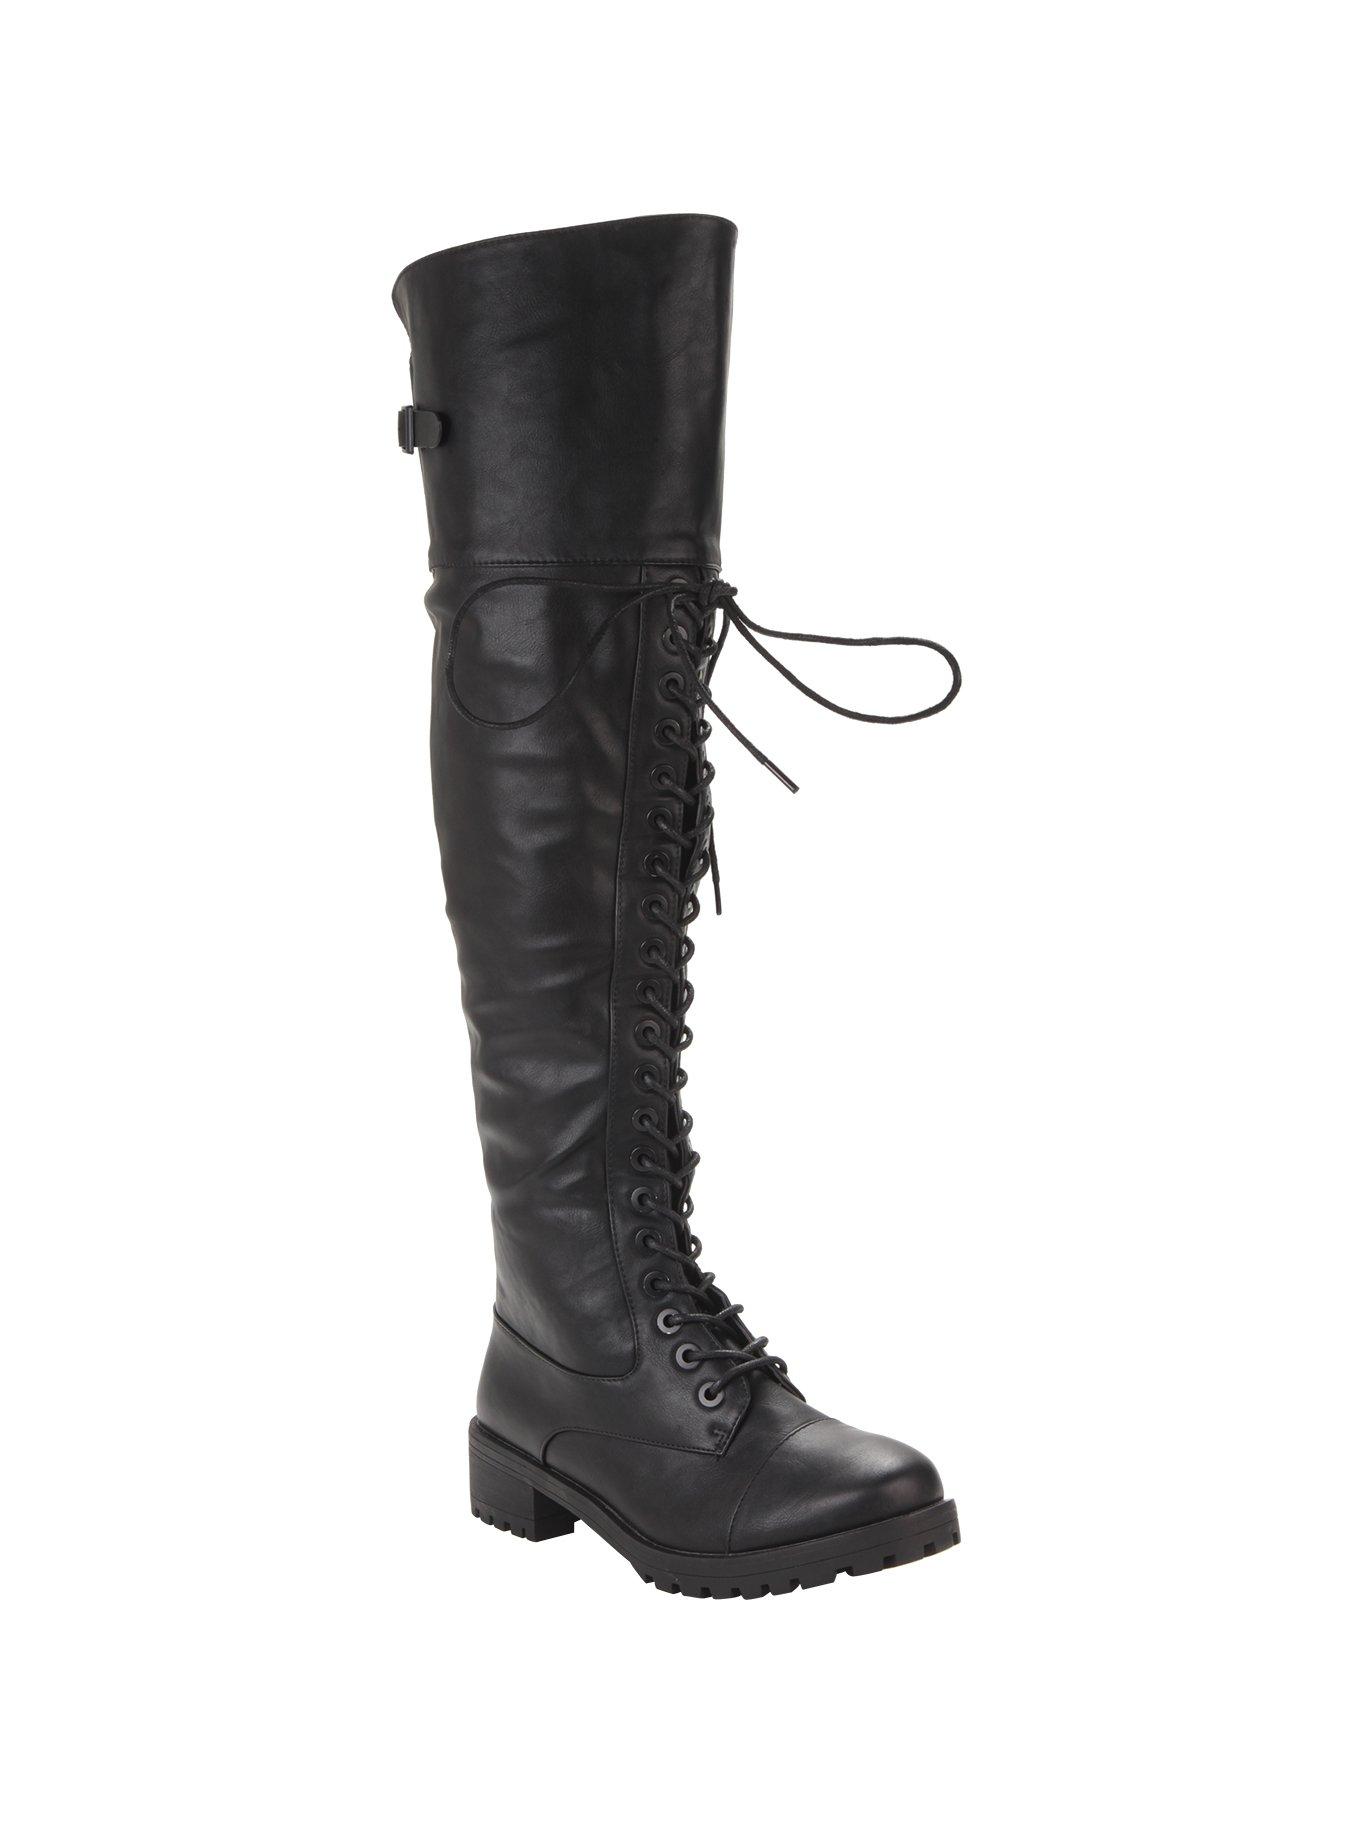 Black Over-The-Knee Combat Boots | Hot Topic